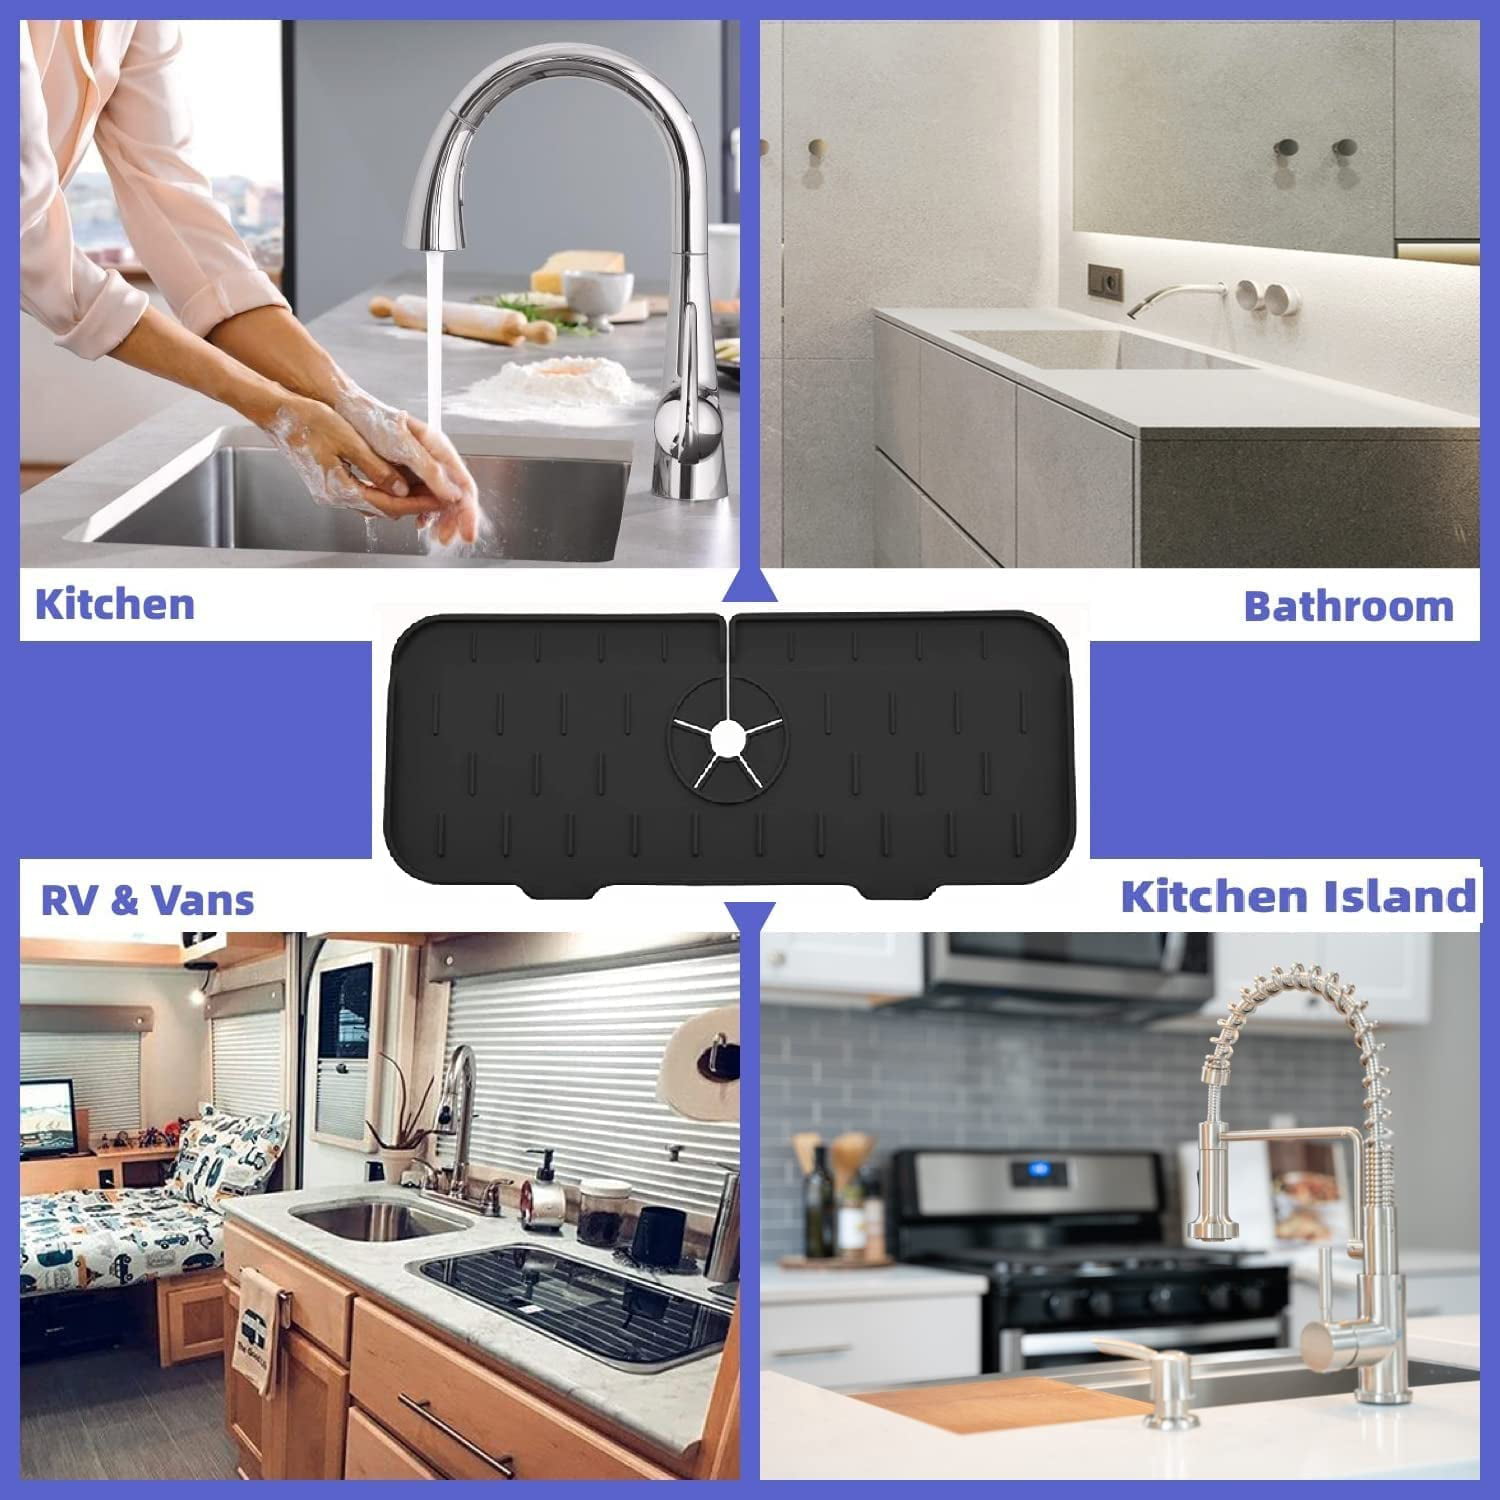 Faucet Draining Mat for Kitchen Sink Foldable Sink Mat Behind Faucet,  TEMASH Faucet Handle Drip Catcher Tray Drain Drying Pad Countertop  Protector for